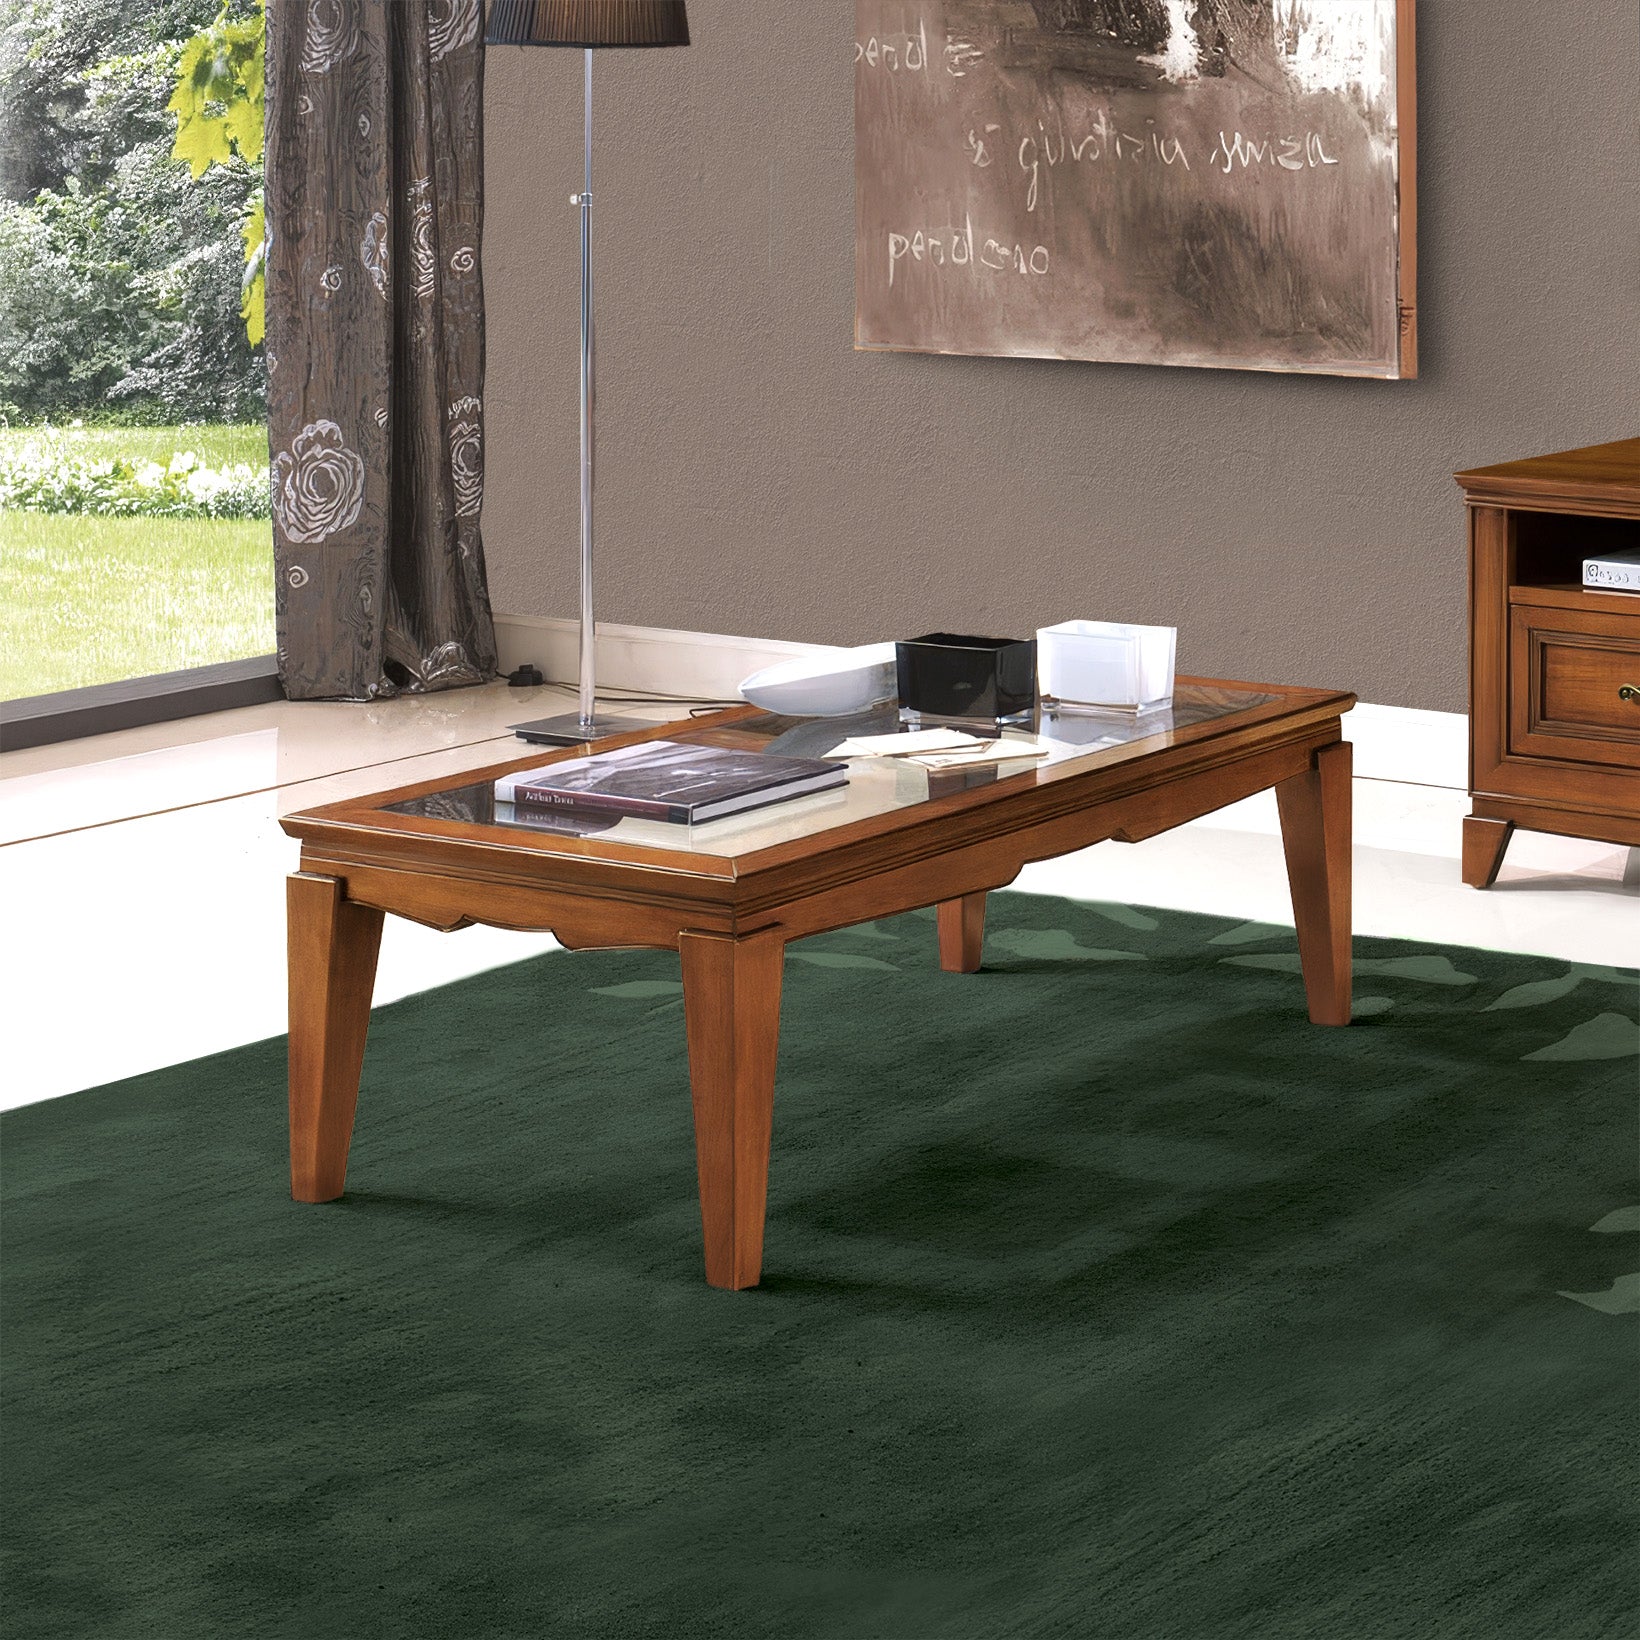 Classic Rectangular Coffee Table L 115 in Cherry Finish and Glass Arte D'Este Piombini Collection